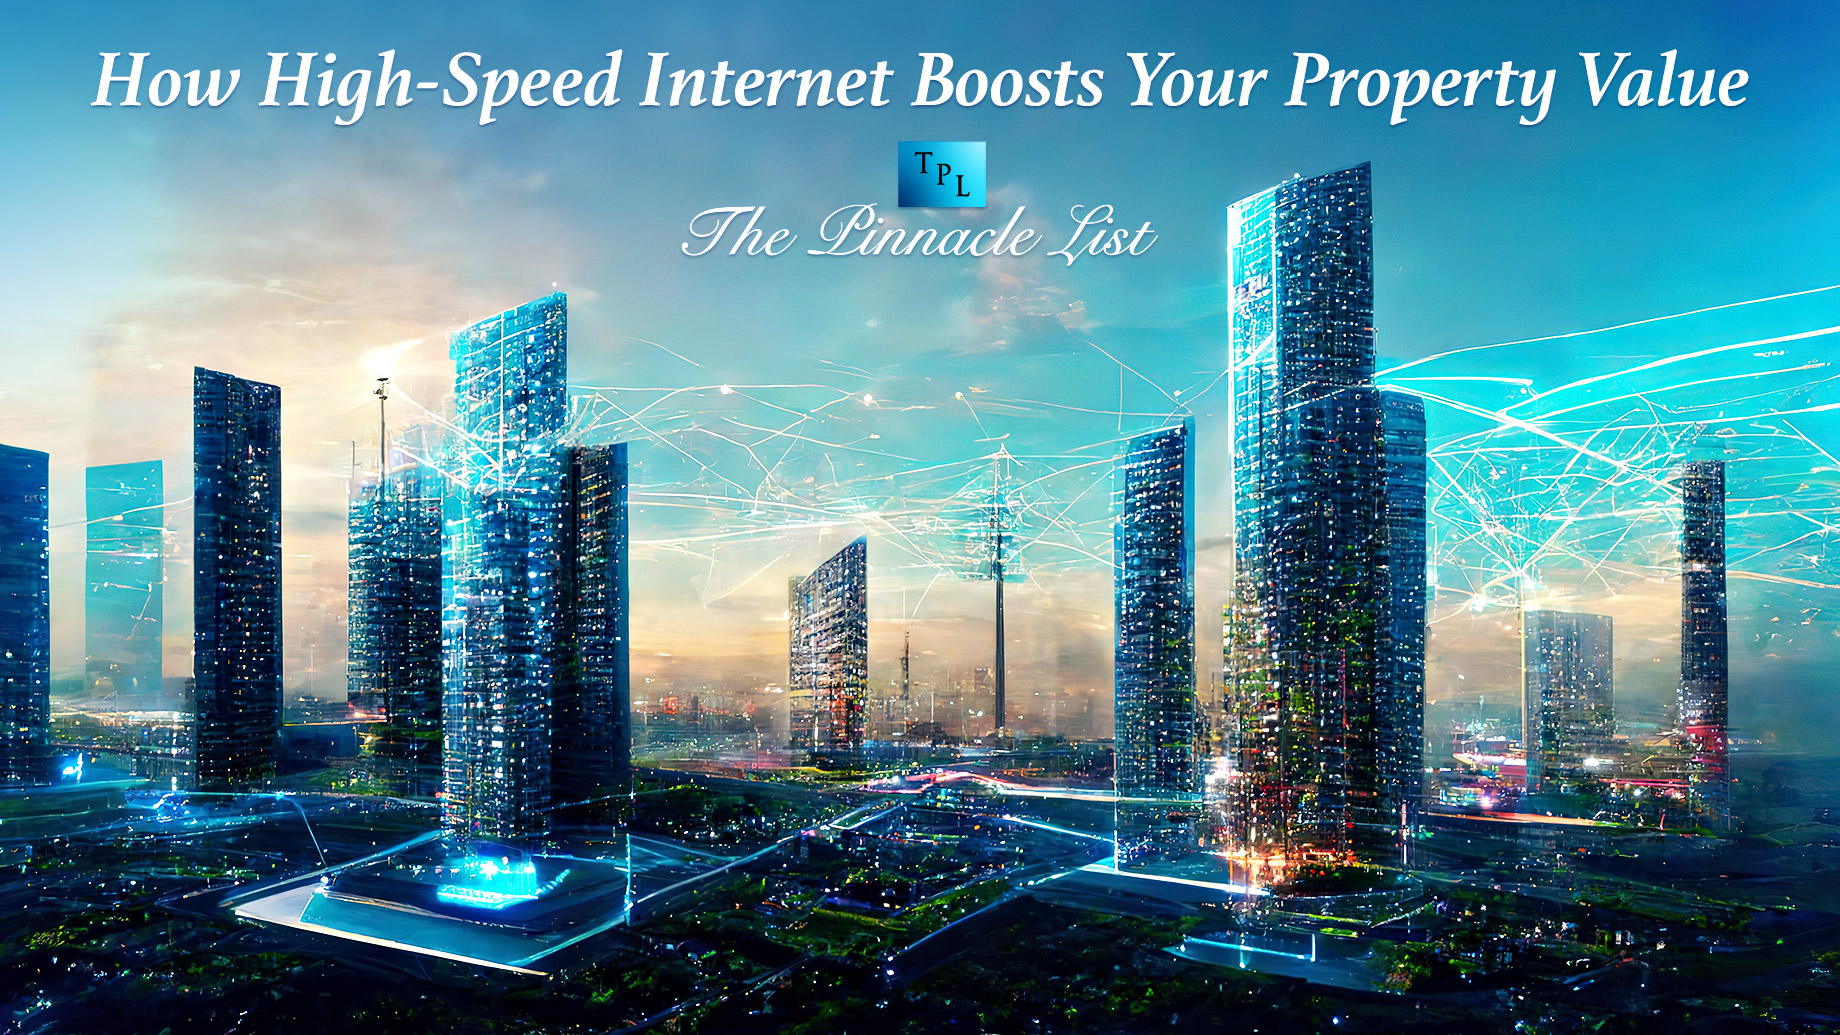 How High-Speed Internet Boosts Your Property Value